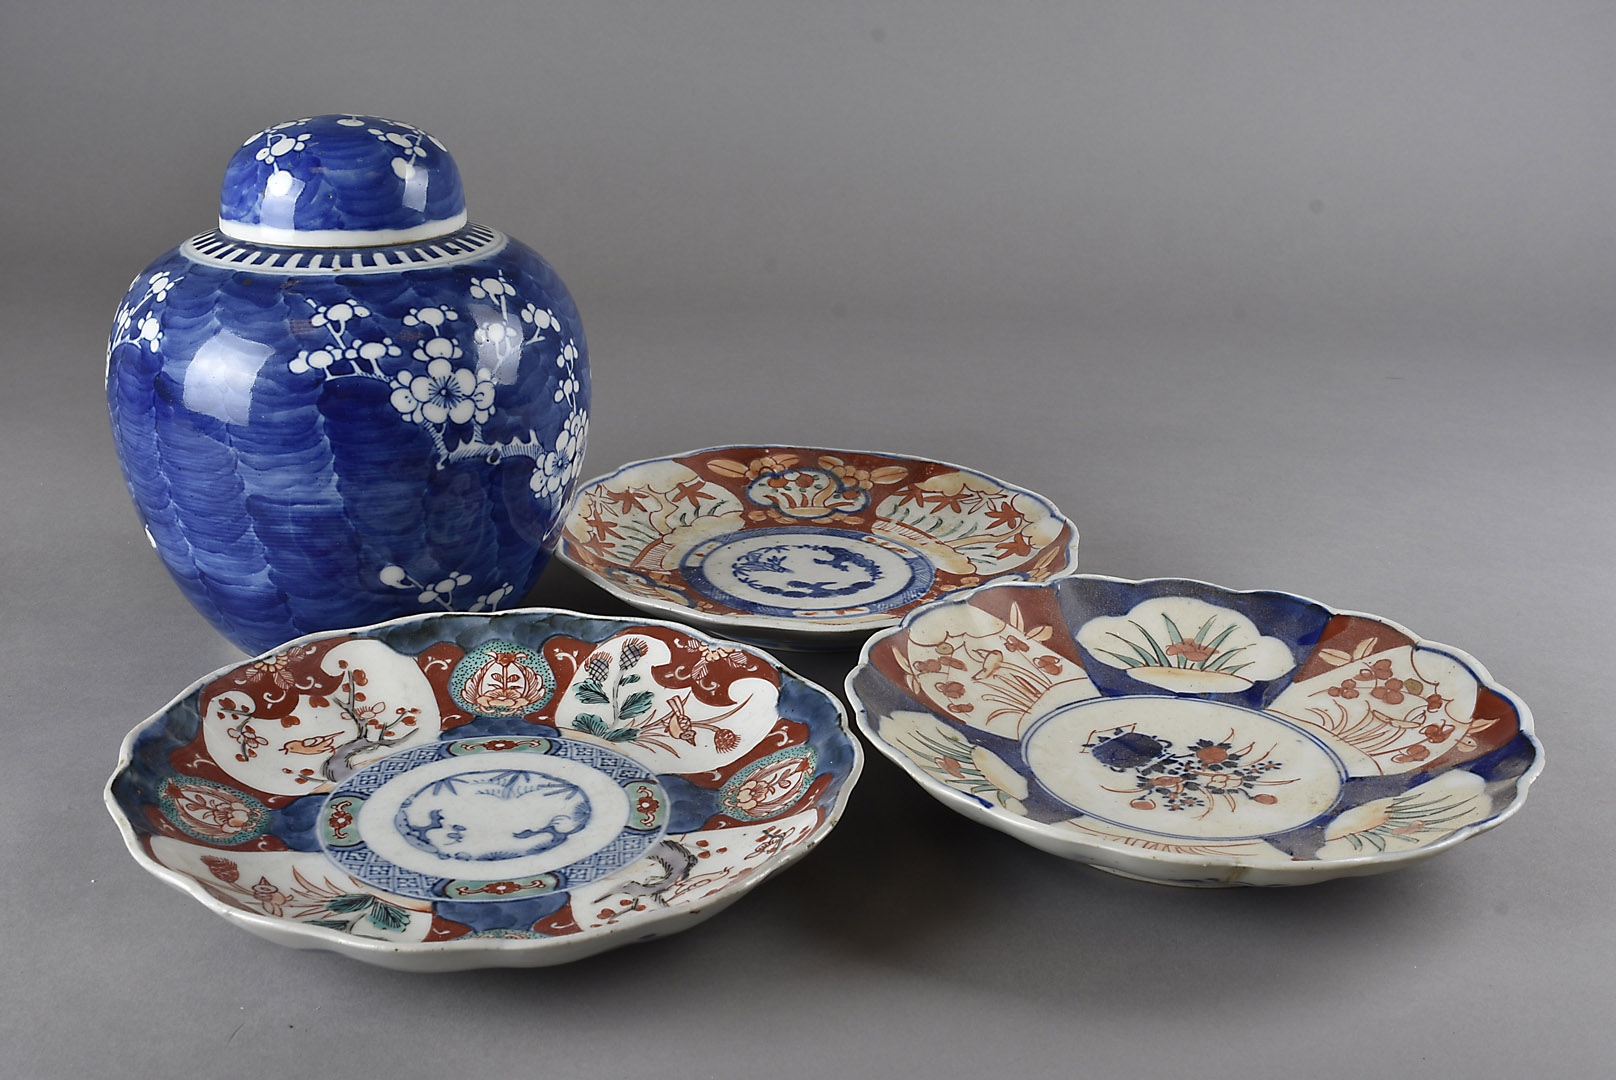 A collection of five lobed Imari plates 22 cm dia., together with a Chinese porcelain ginger jar and